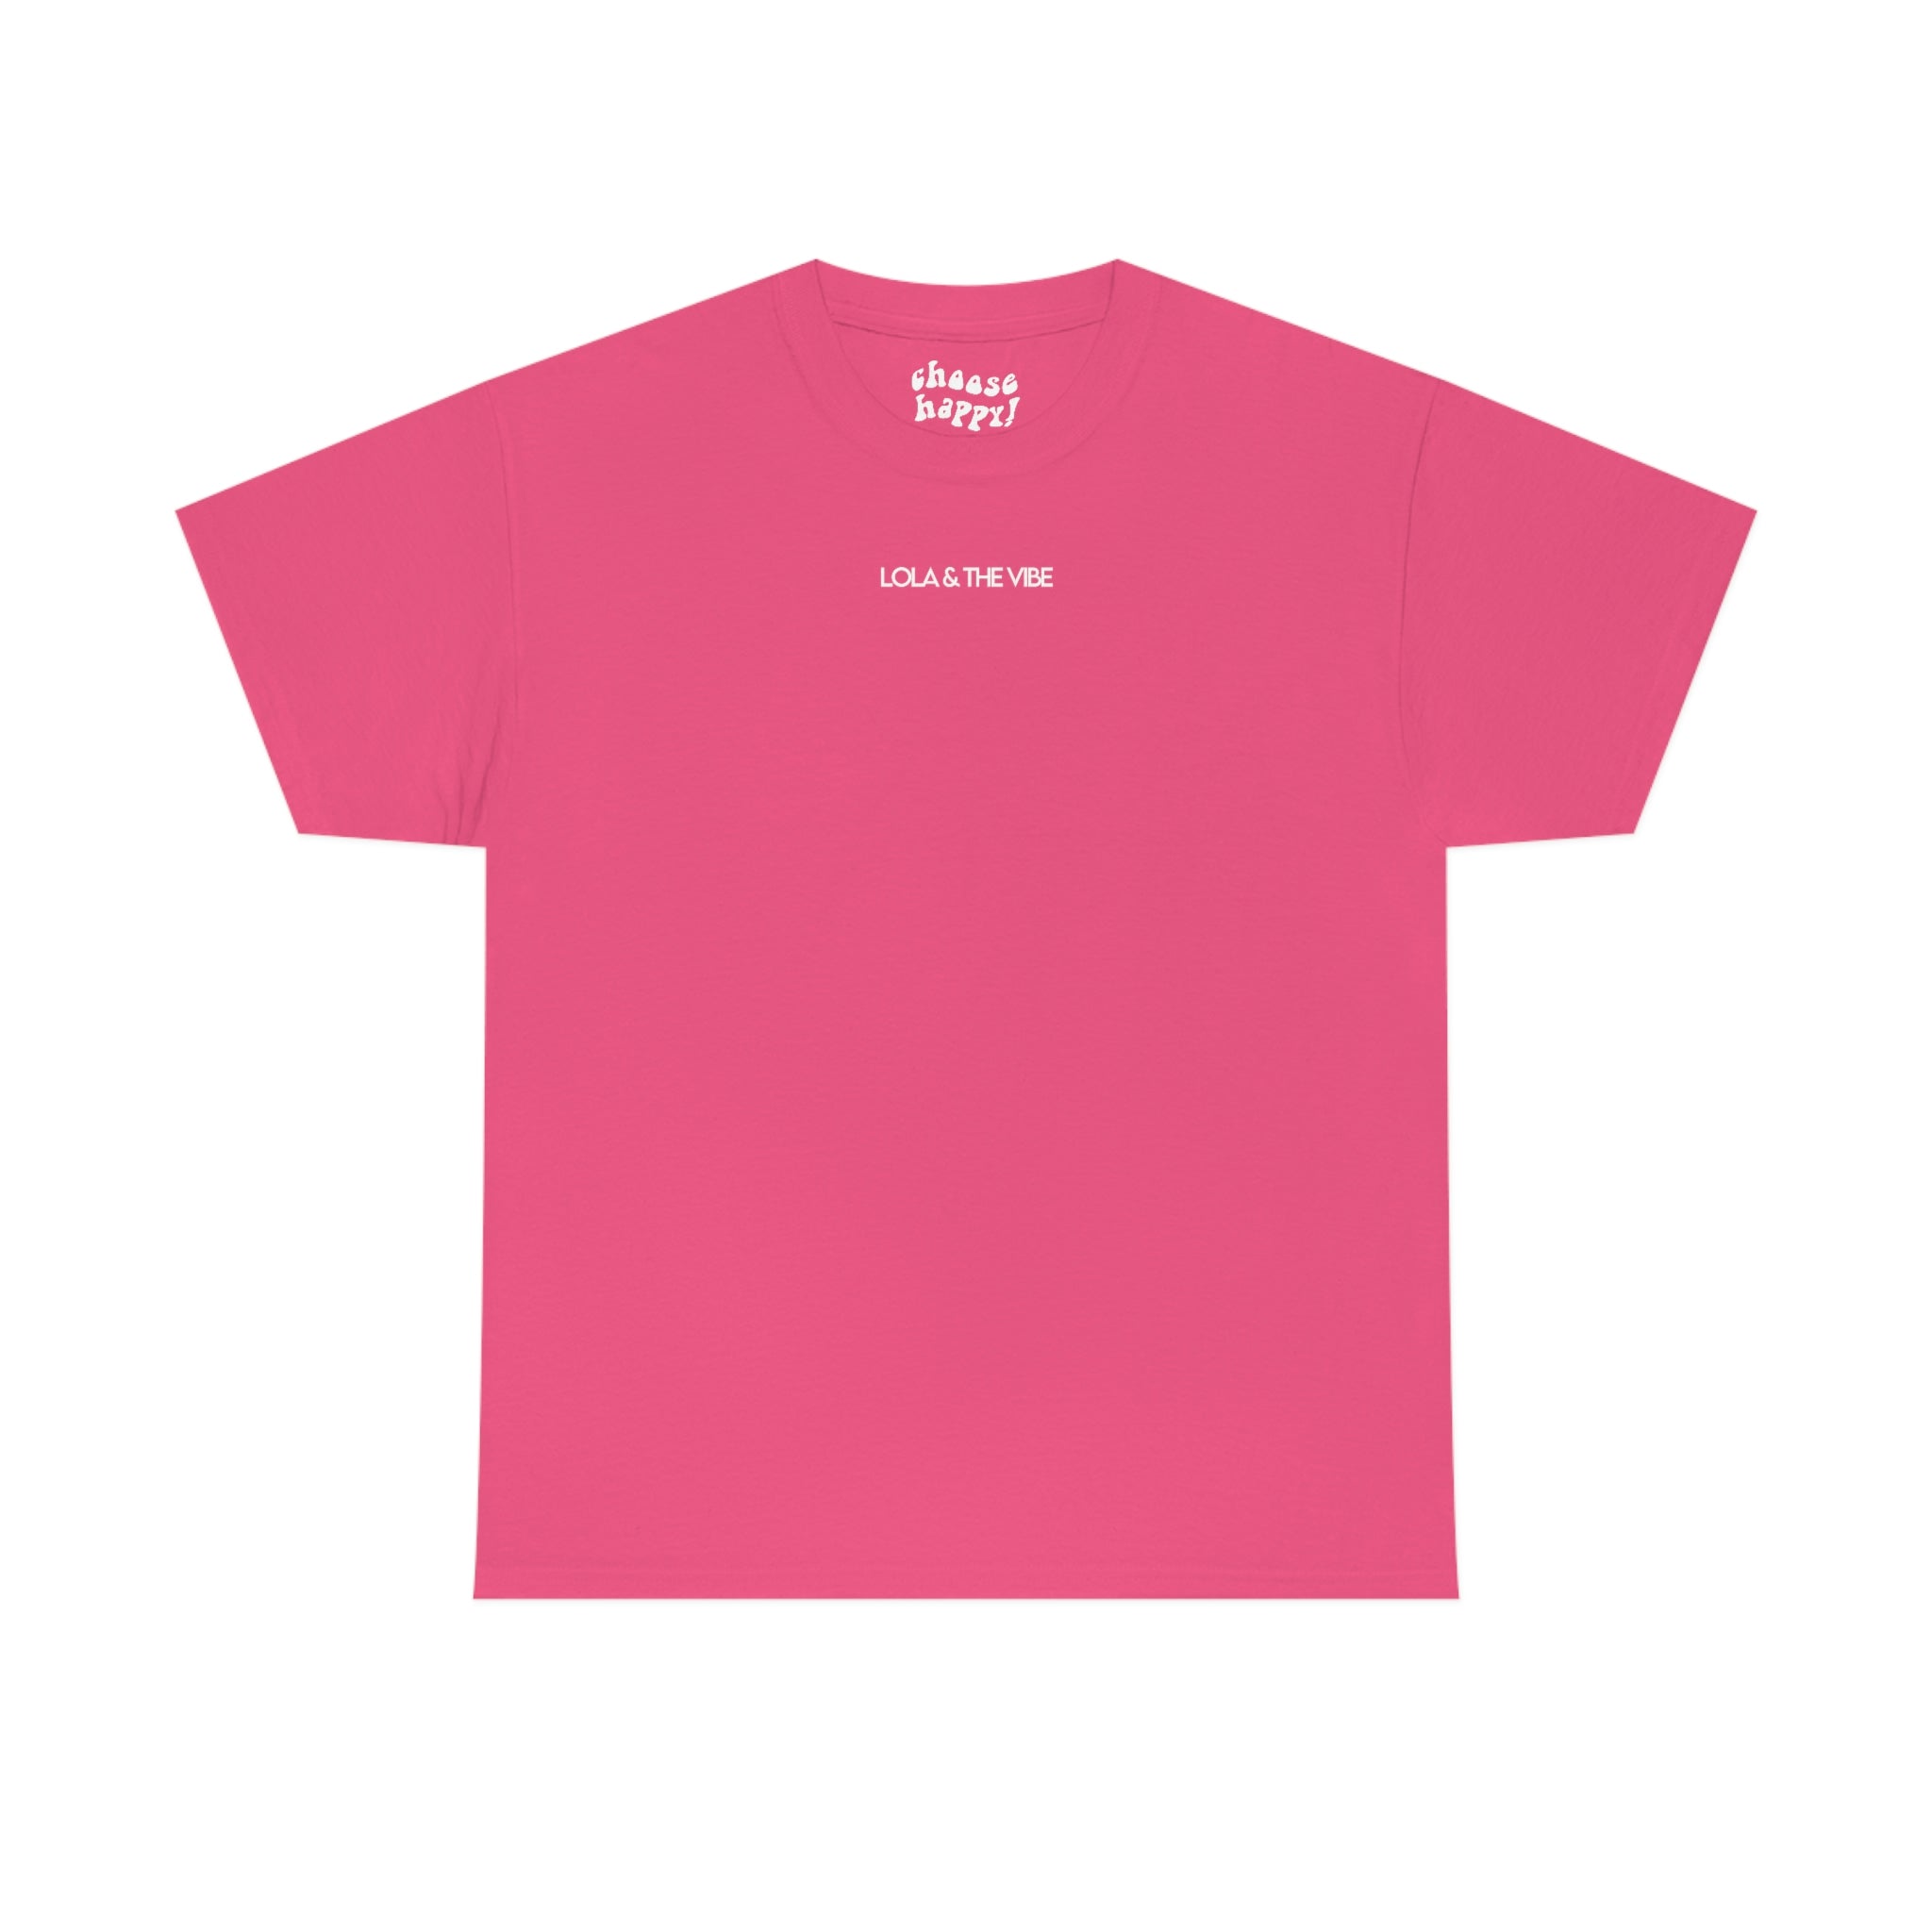 SYLMT Tee - Pink With White